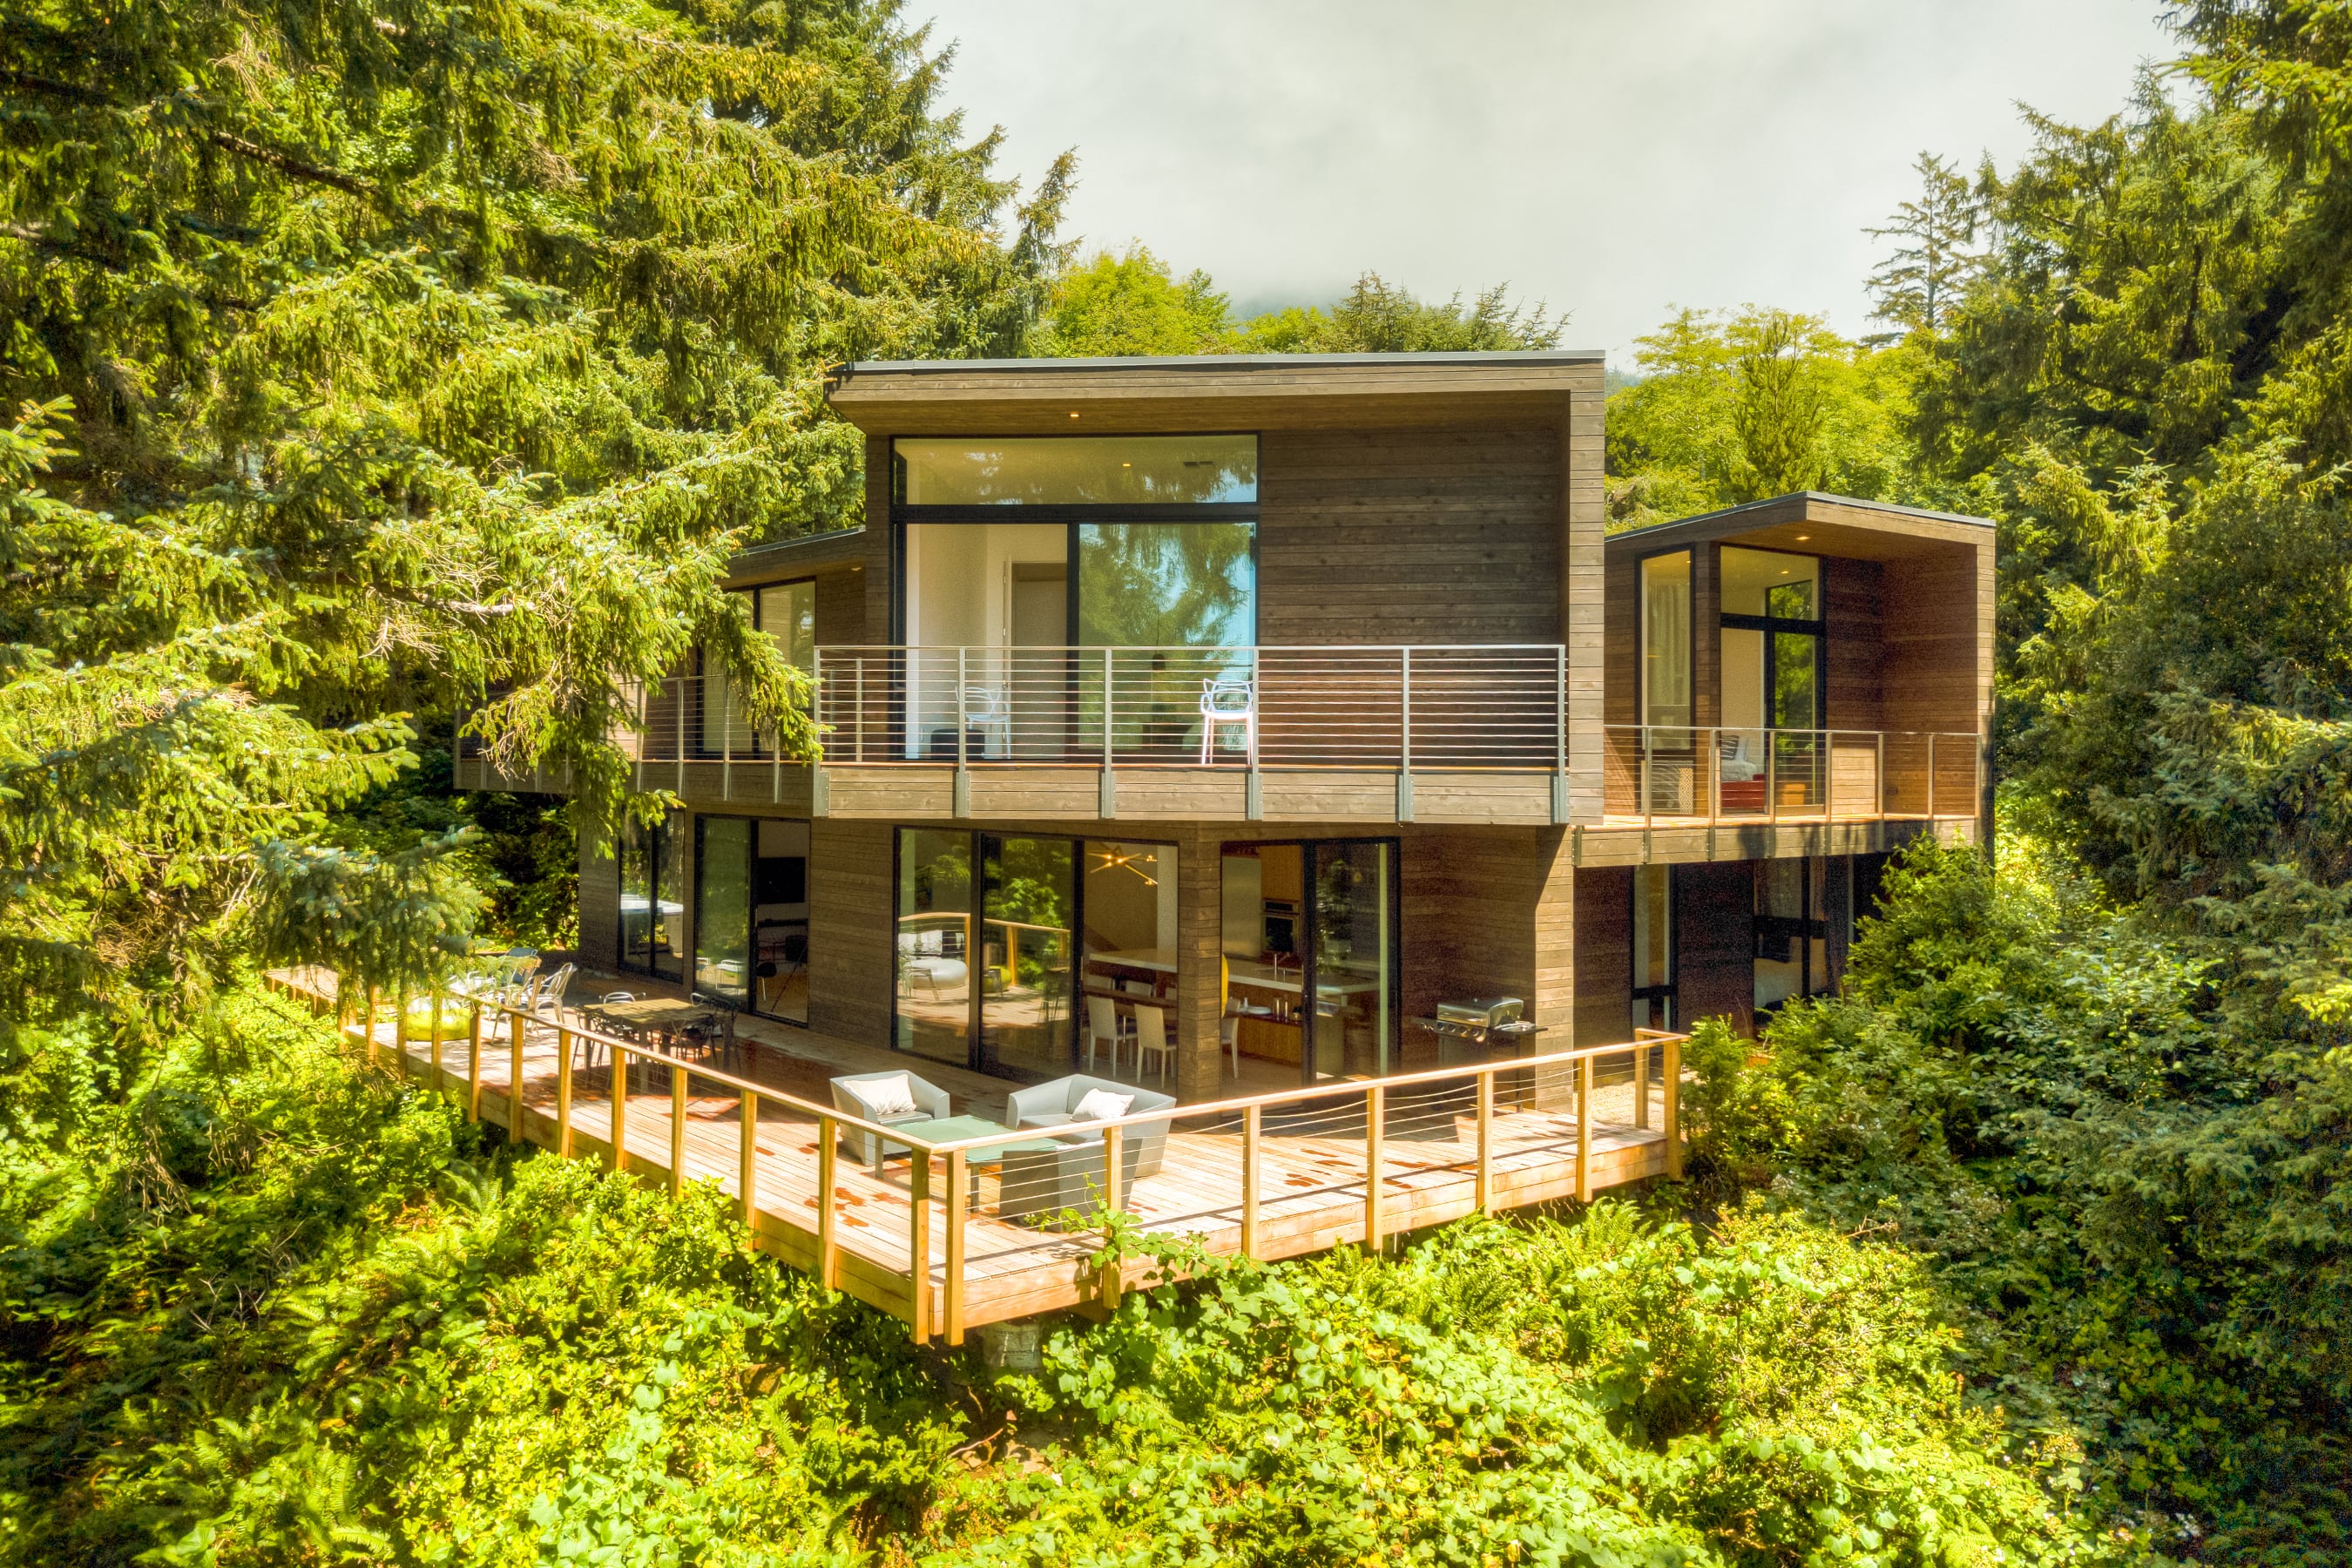 Manzanita, Oregon – A modern architectural masterpiece nestled in trees. Floor-to-ceiling windows bathe the space in light with views of Neahkahnie Beach.